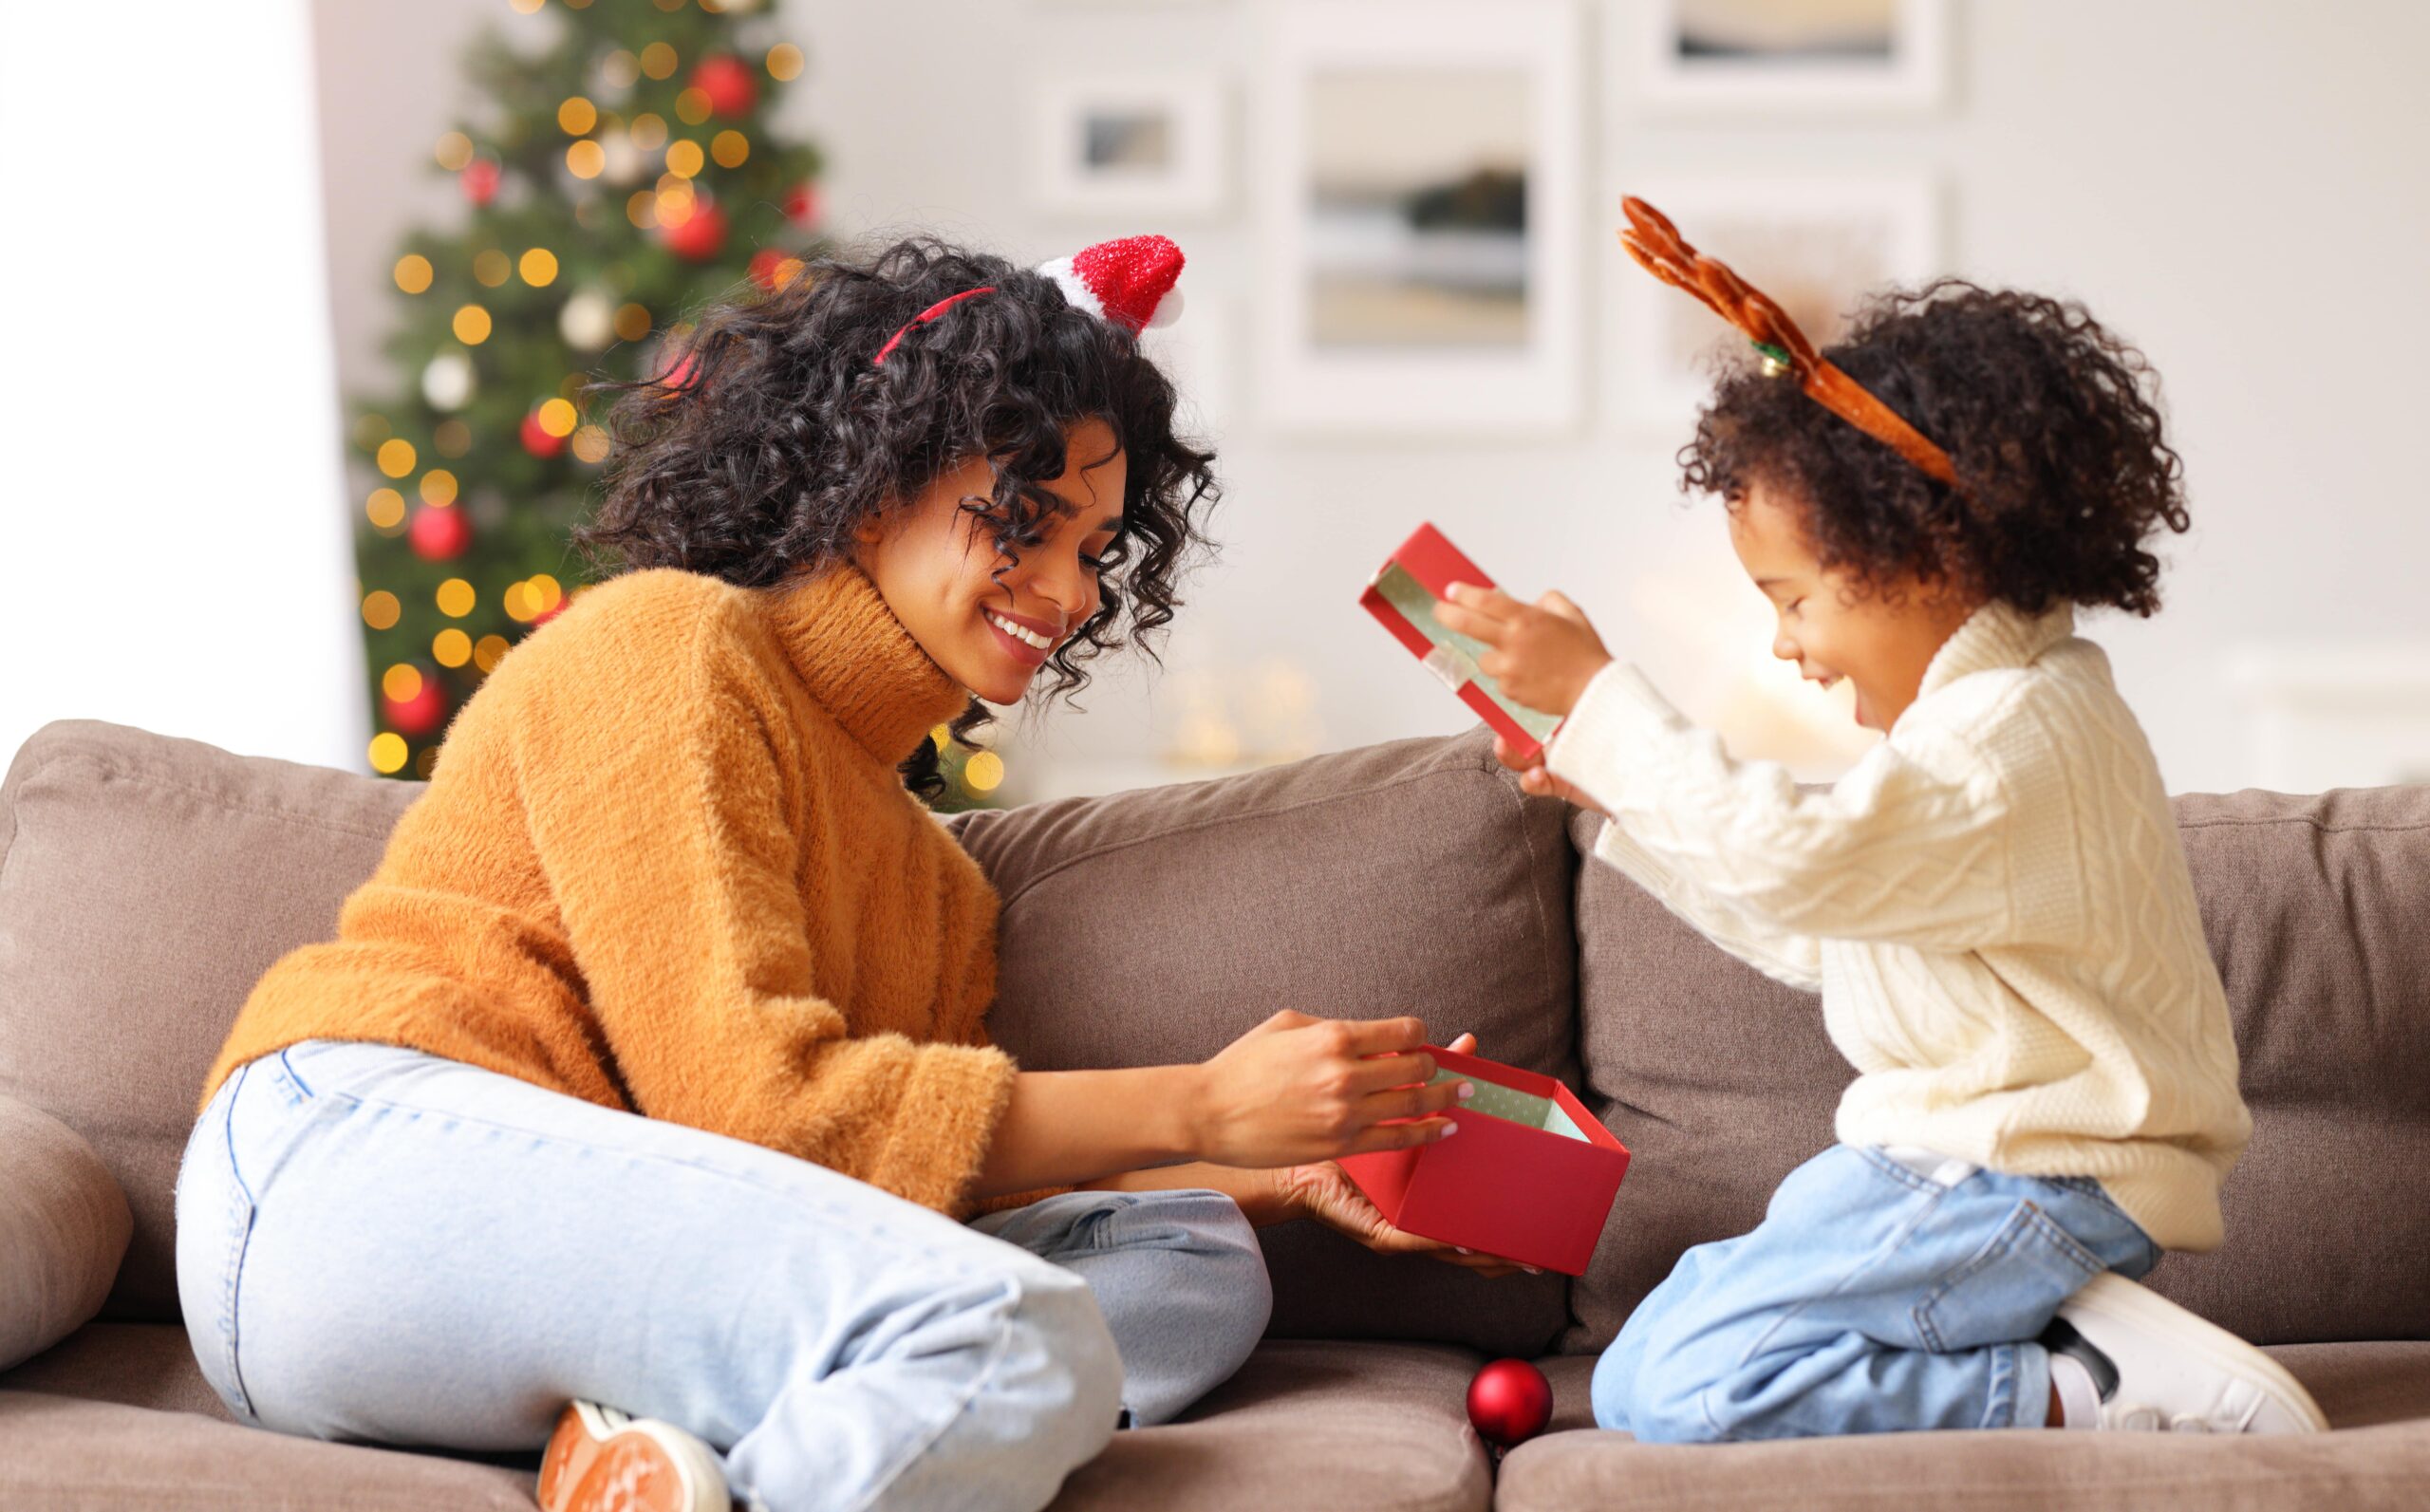 Christmas gift ideas for the whole family | Age Times